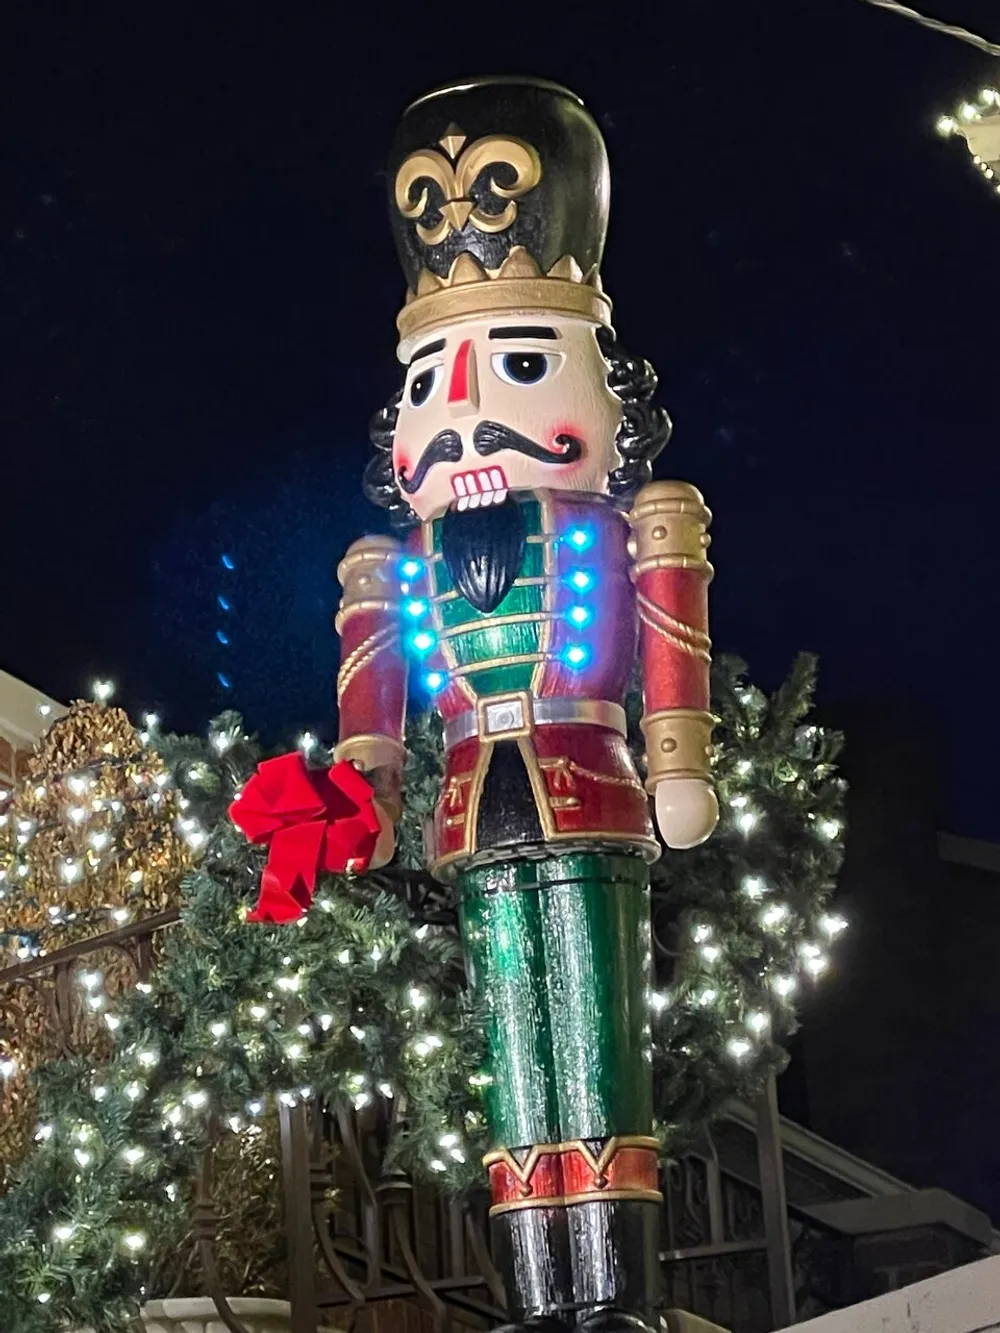 The image shows a large illuminated nutcracker decoration surrounded by festive lights likely part of a holiday display